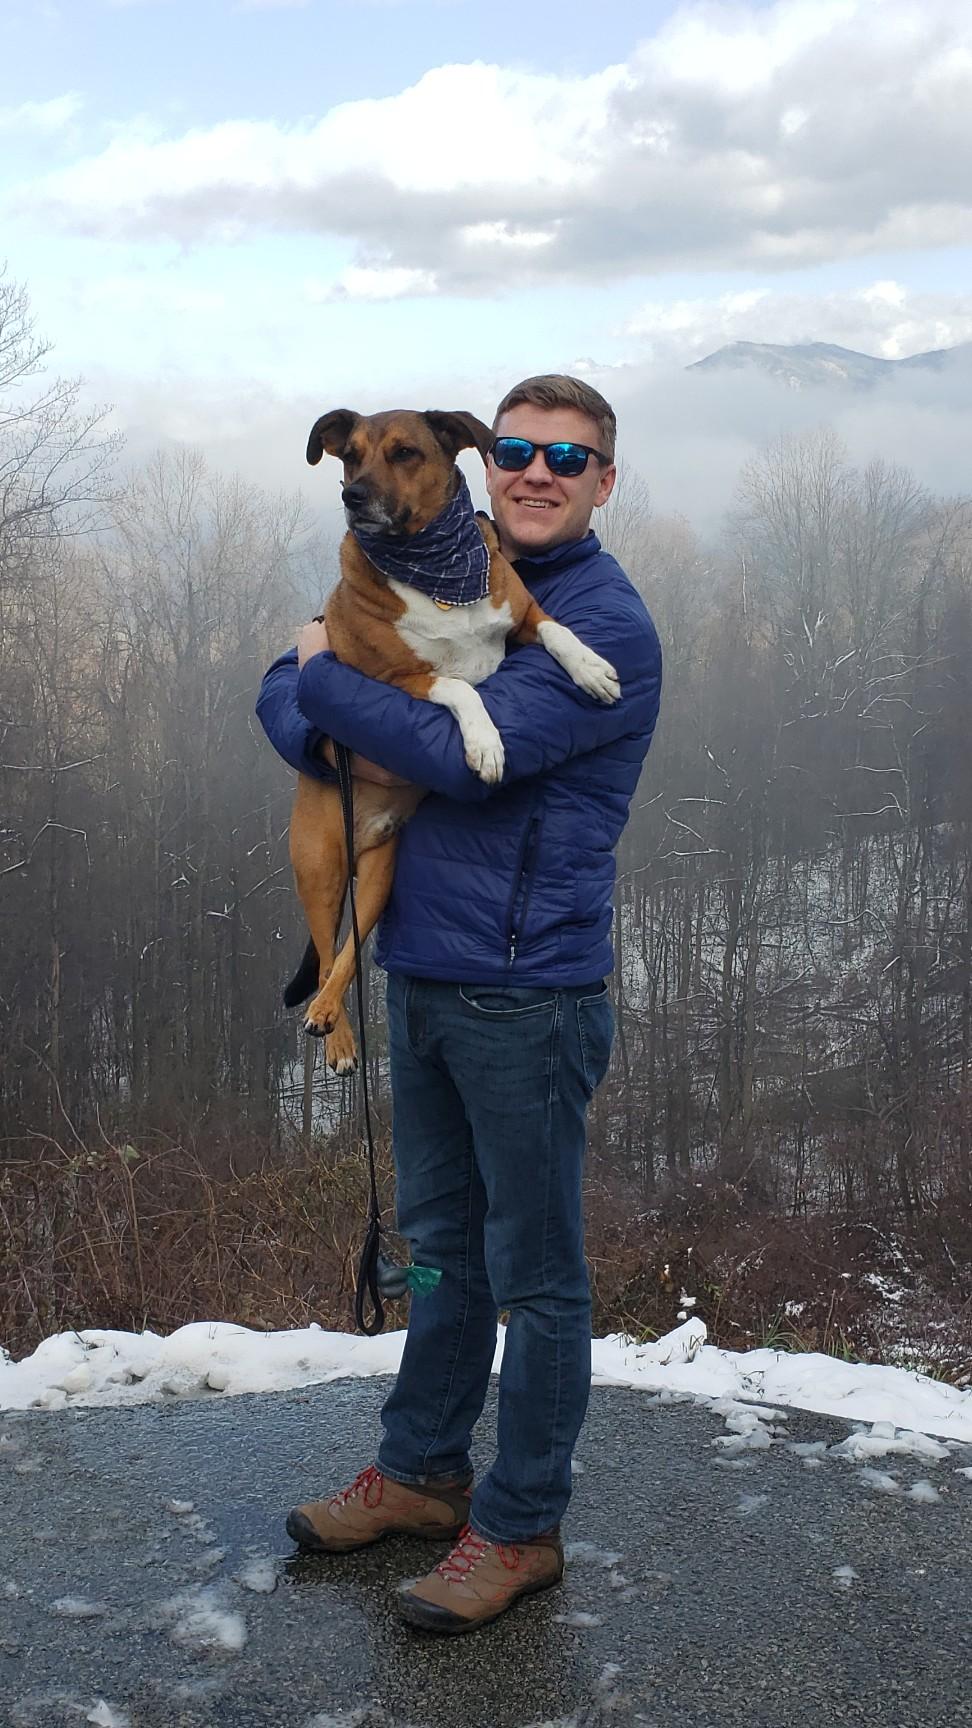 Nathaniel Abbott, holding his dog, Renly, with mountains in the background.